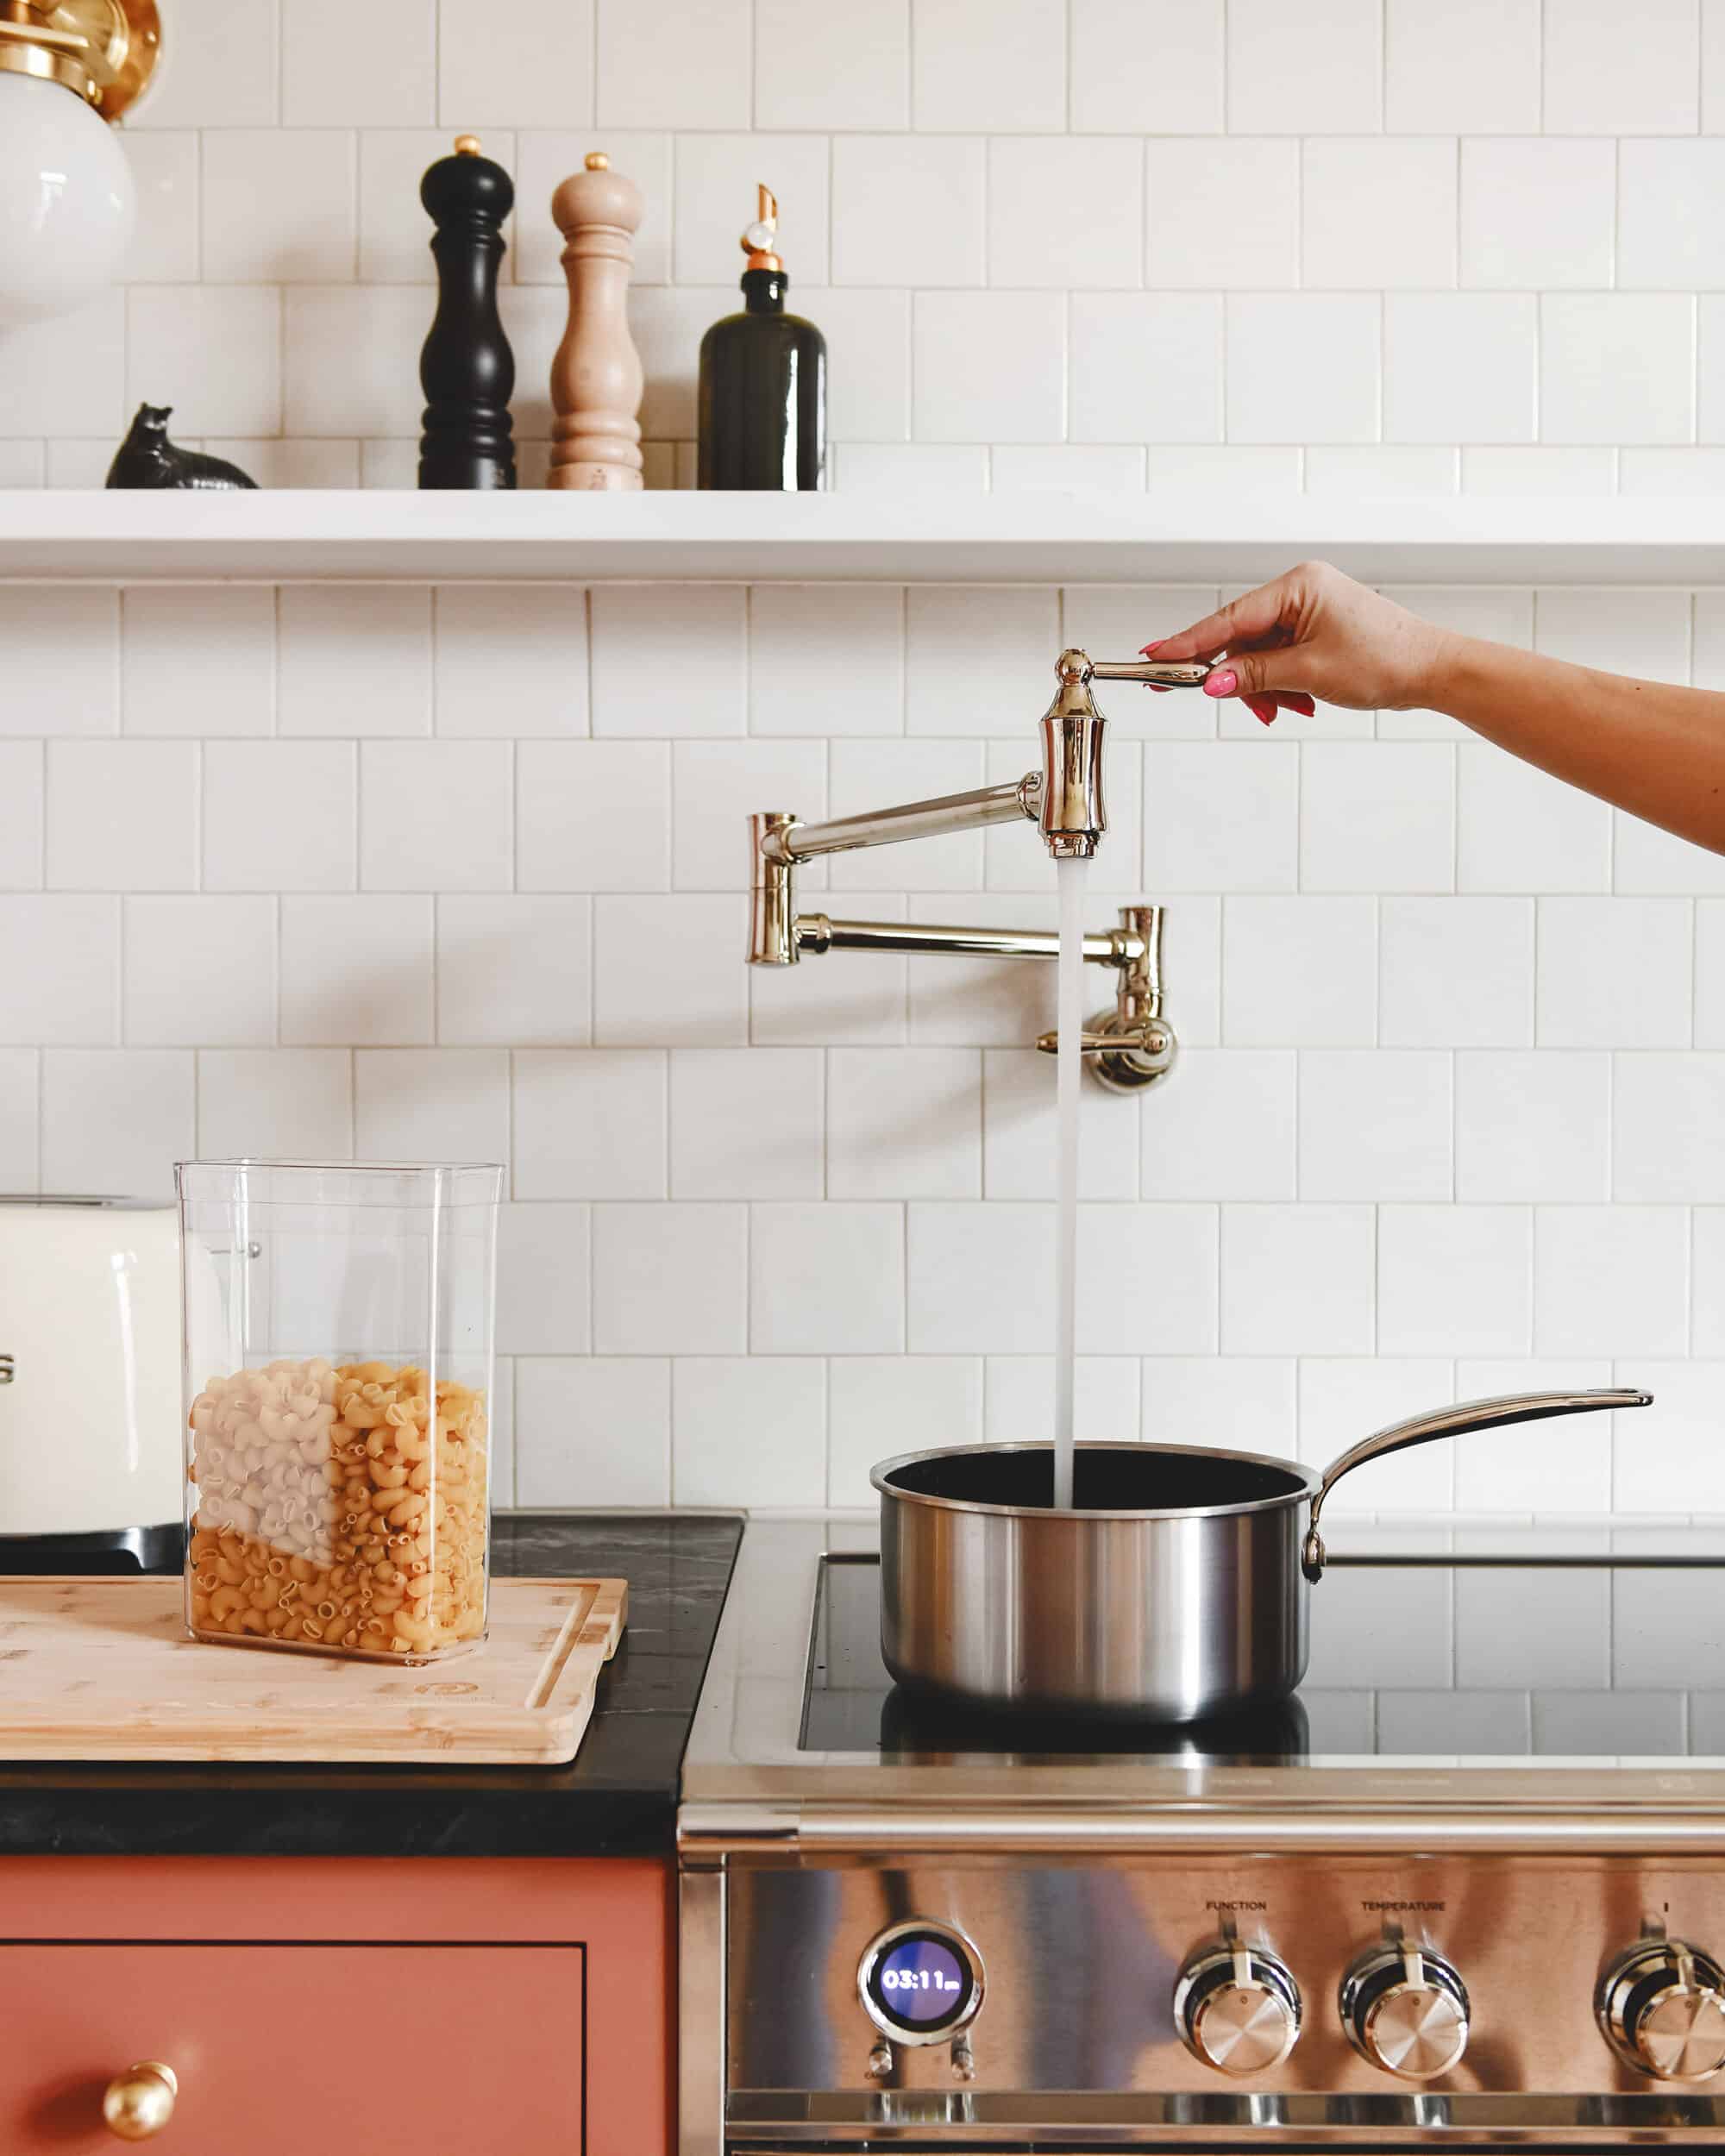 The delta traditional wall mount pot filler above our new range // via Yellow Brick Home